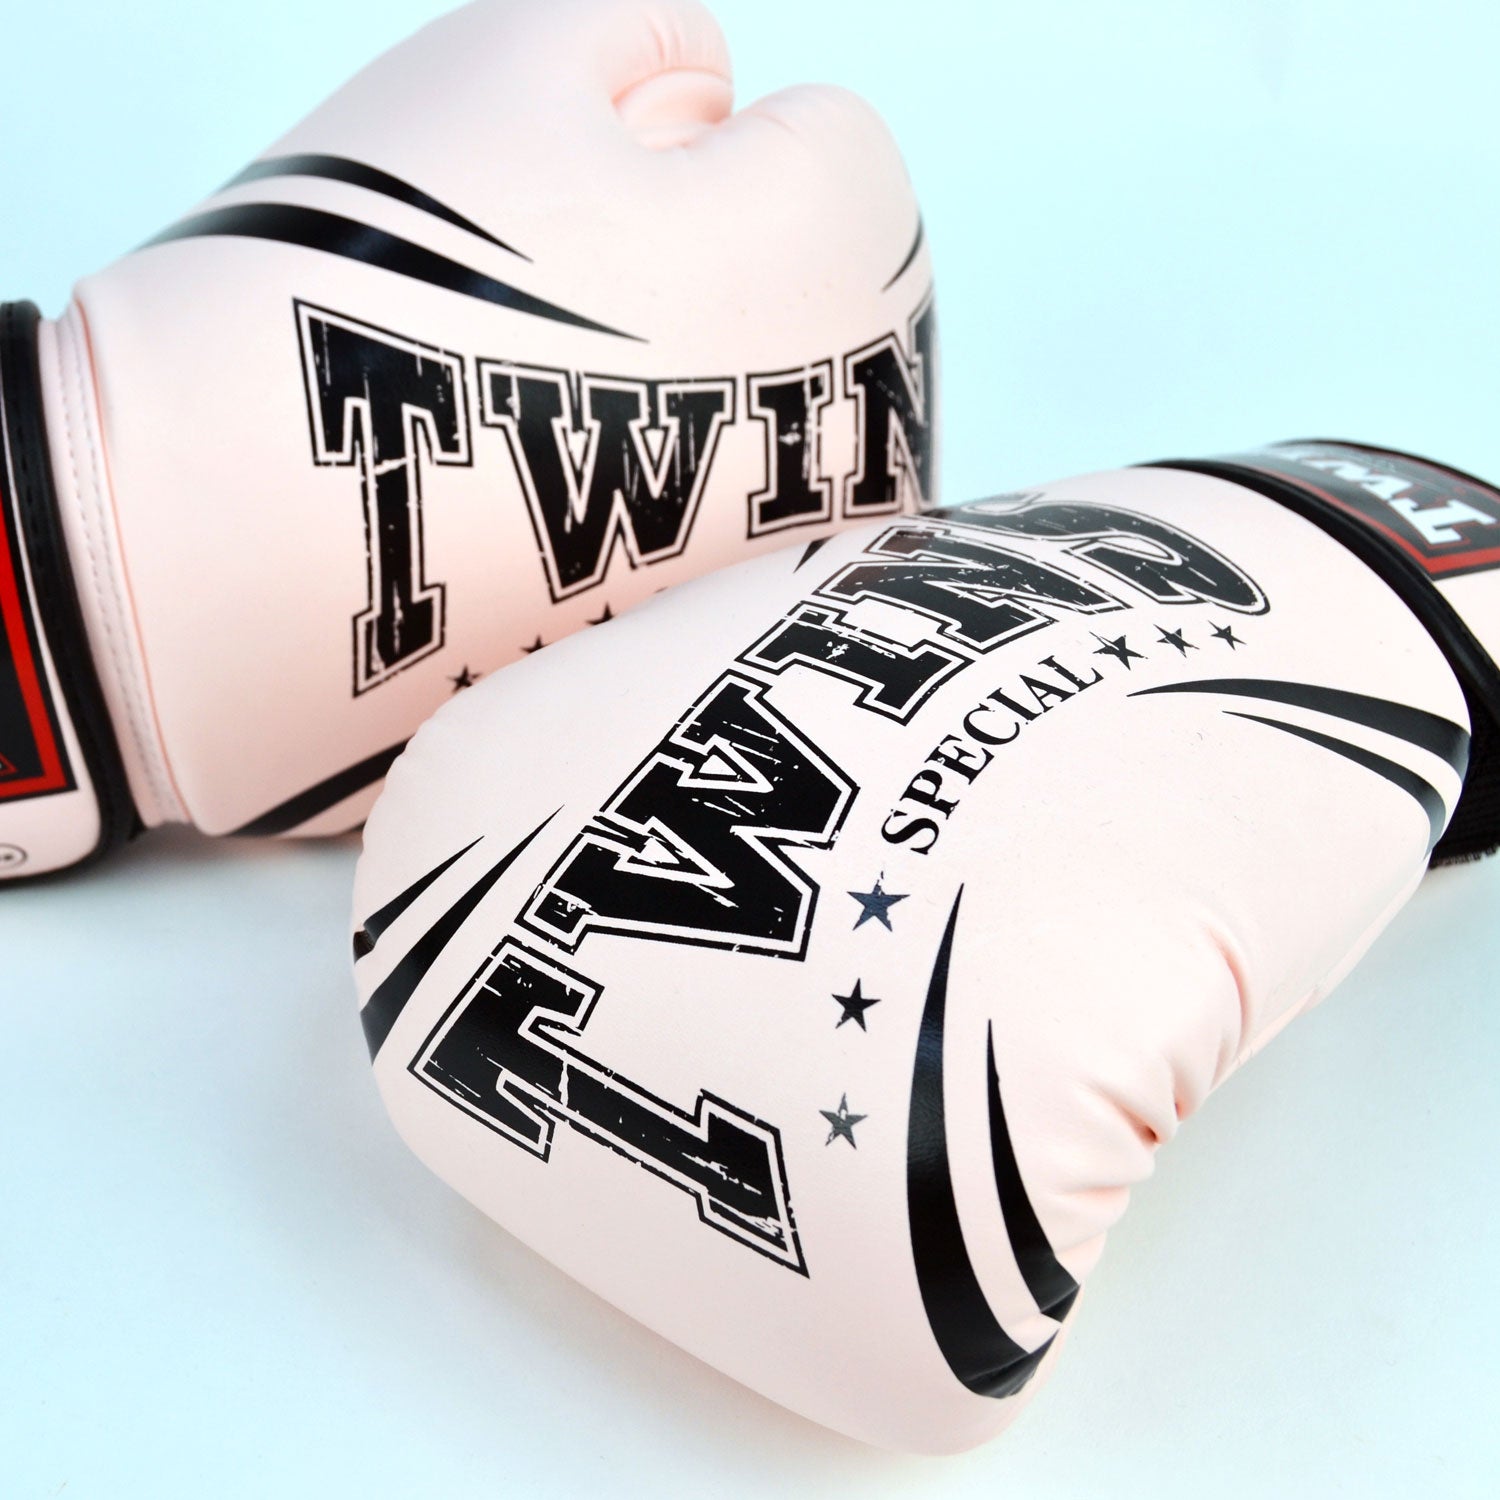 Twins Green Synthetic Boxing Gloves Twins Special